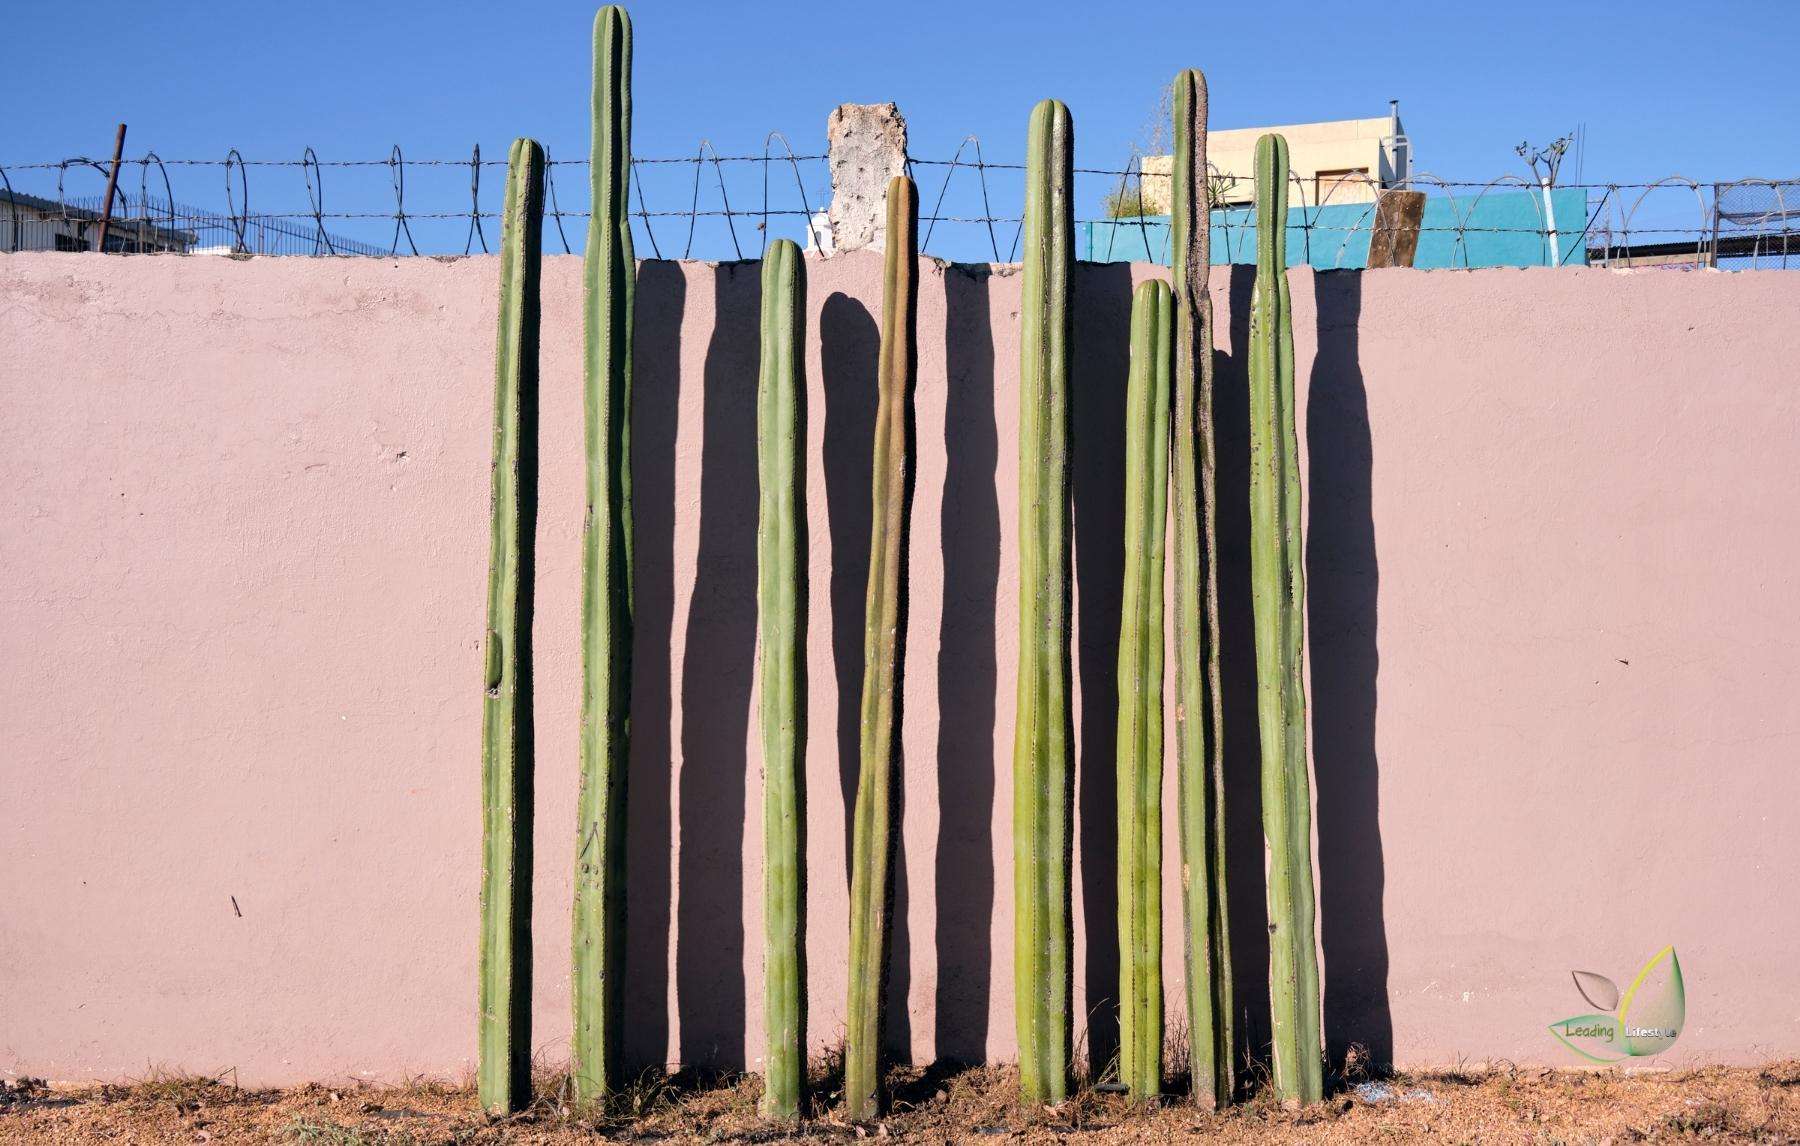 Mexican fence post cactus